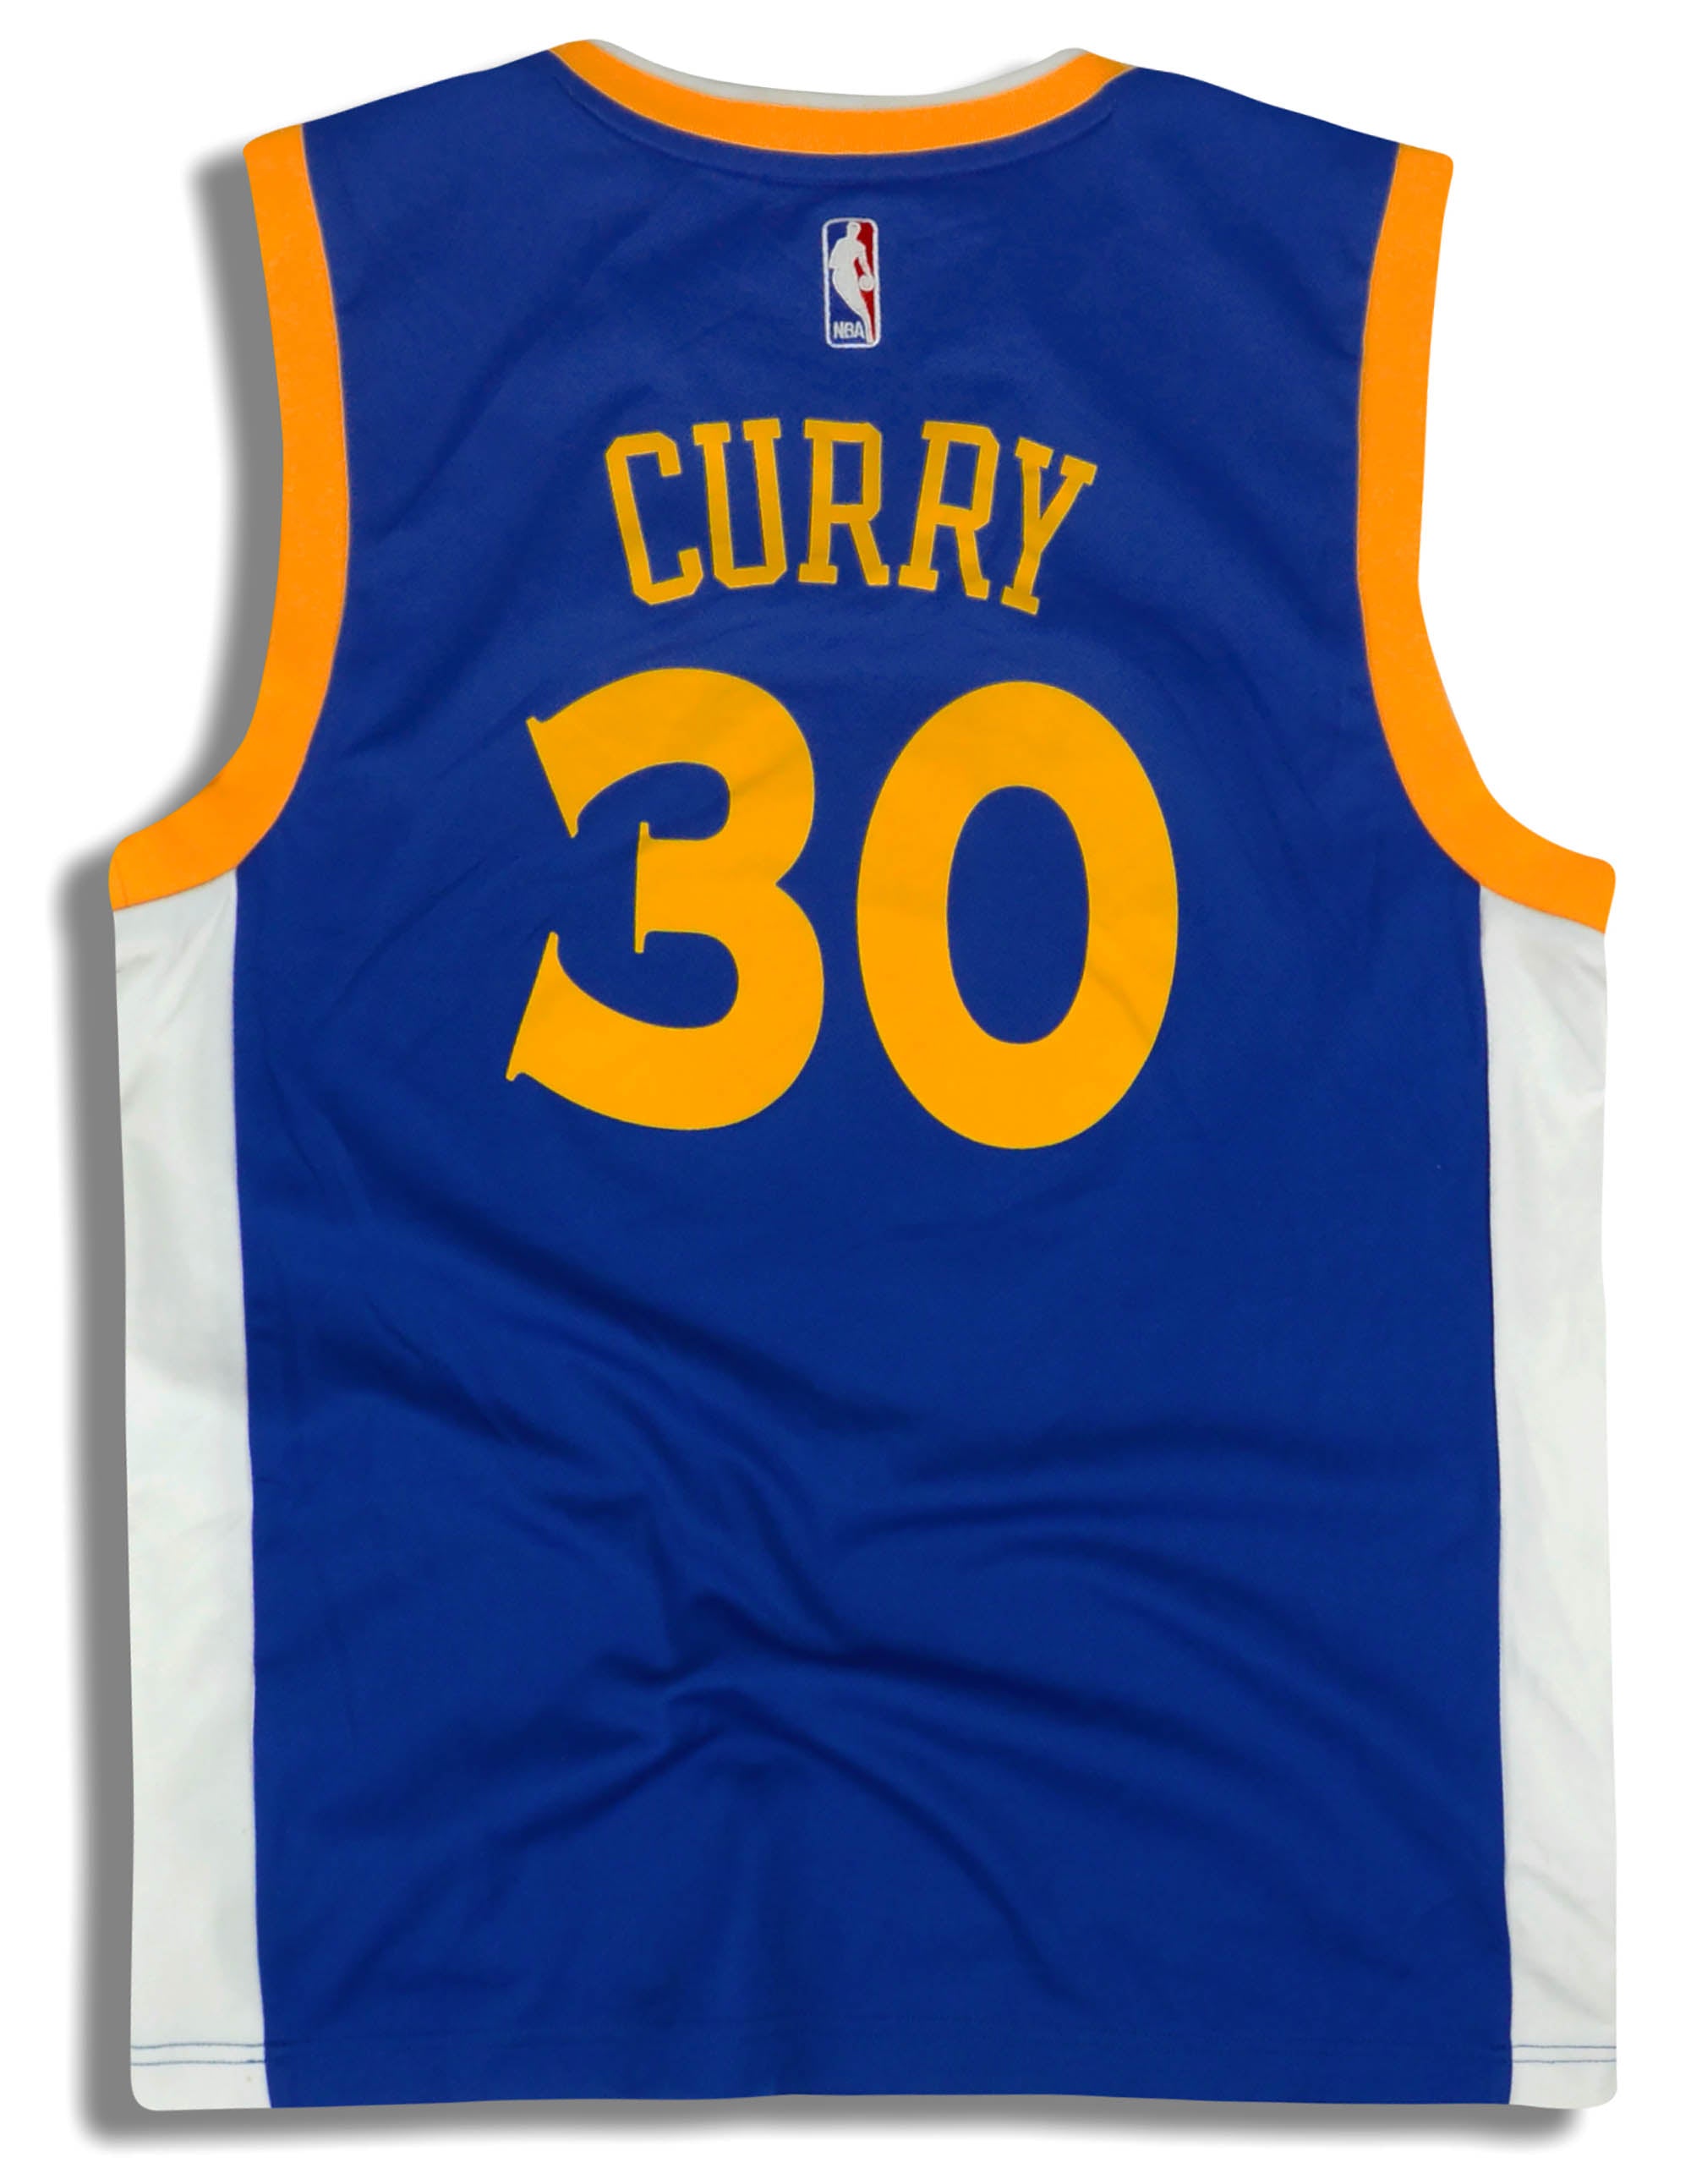 steph curry rookie jersey